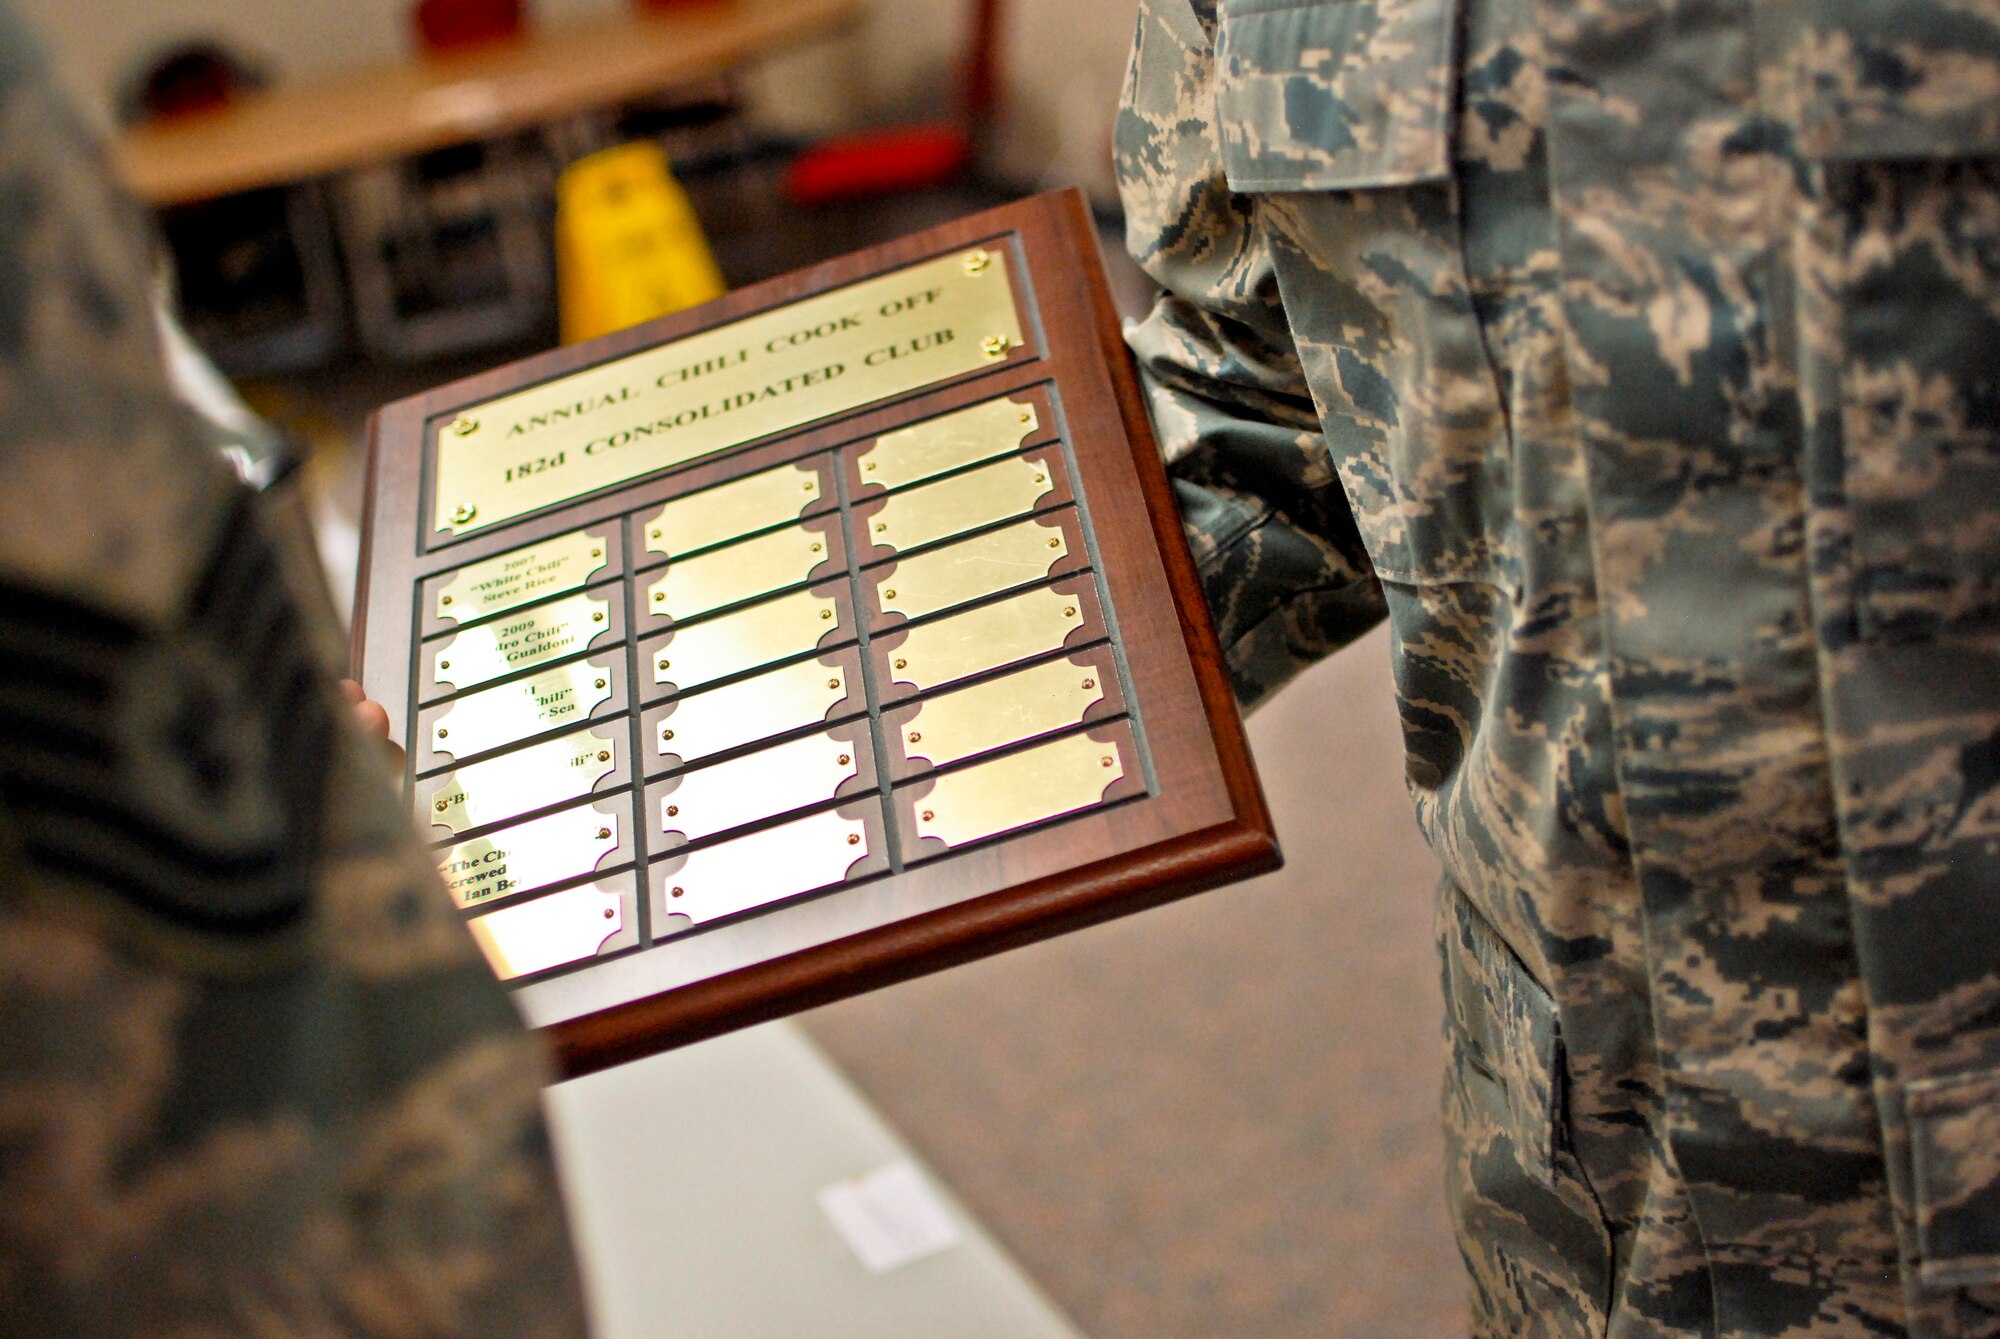 U.S. Air Force Tech. Sgt. Alex R. Sea, vehicle equipment maintenance specialist with the 182nd Logistics Readiness Squadron, right, displays the plaque of winners after the sixth-annual chili cook off at the 182nd Airlift Wing, Peoria, Ill., Jan. 8, 2014. The competition placed 13 contestants and their homemade chili recipes against each other to compete for best look and smell, best consistency, and best taste. Sea won in both the best consistency and most overall points categories for his Jabbo Chili recipe. He was awarded a five-year membership to the wing’s consolidated club and had his name added to the winners’ plaque. The event brought out approximately 120 unit members to sample the various white and traditional red entries, and raised $490 in support of operating the wing’s consolidated club. Sea enjoys the yearly event because he gets to have good chili with good people, he said. “It’s a good way to get out and mingle and talk to the people you don’t usually see on a day-to-day basis.” (U.S. Air National Guard photo by Staff Sgt. Lealan Buehrer/Released)